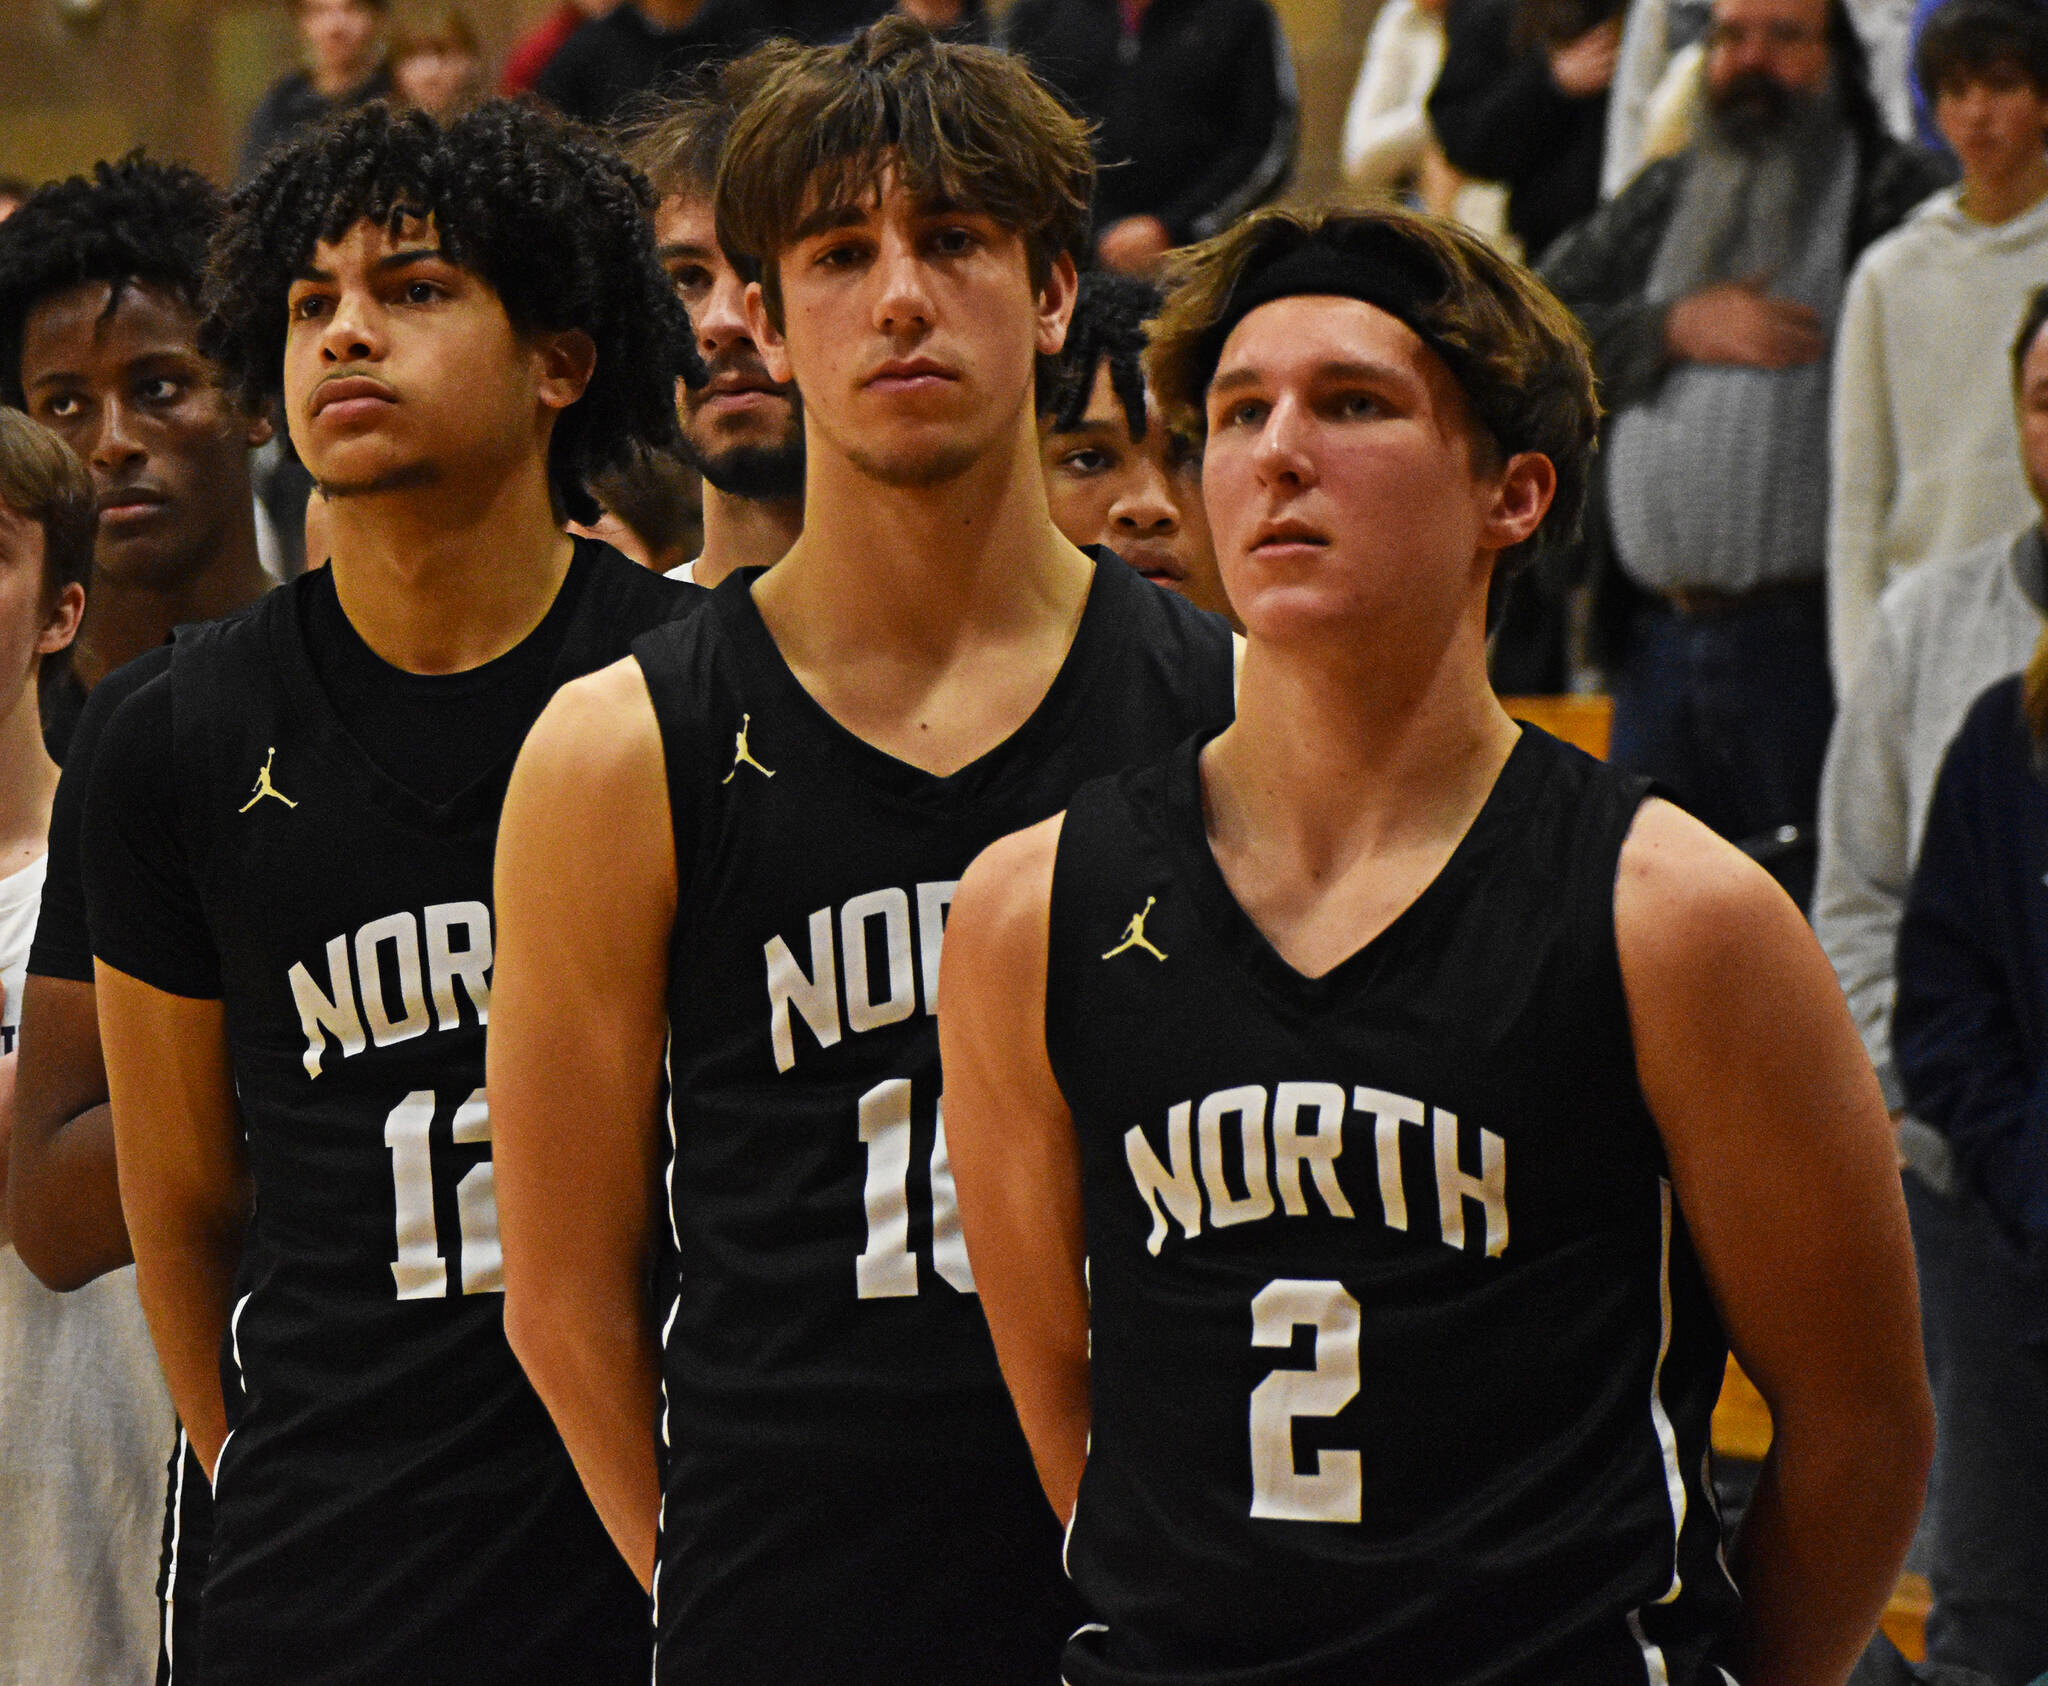 The North Kitsap Vikings were unable to suit up their whole varsity team to due sick players.